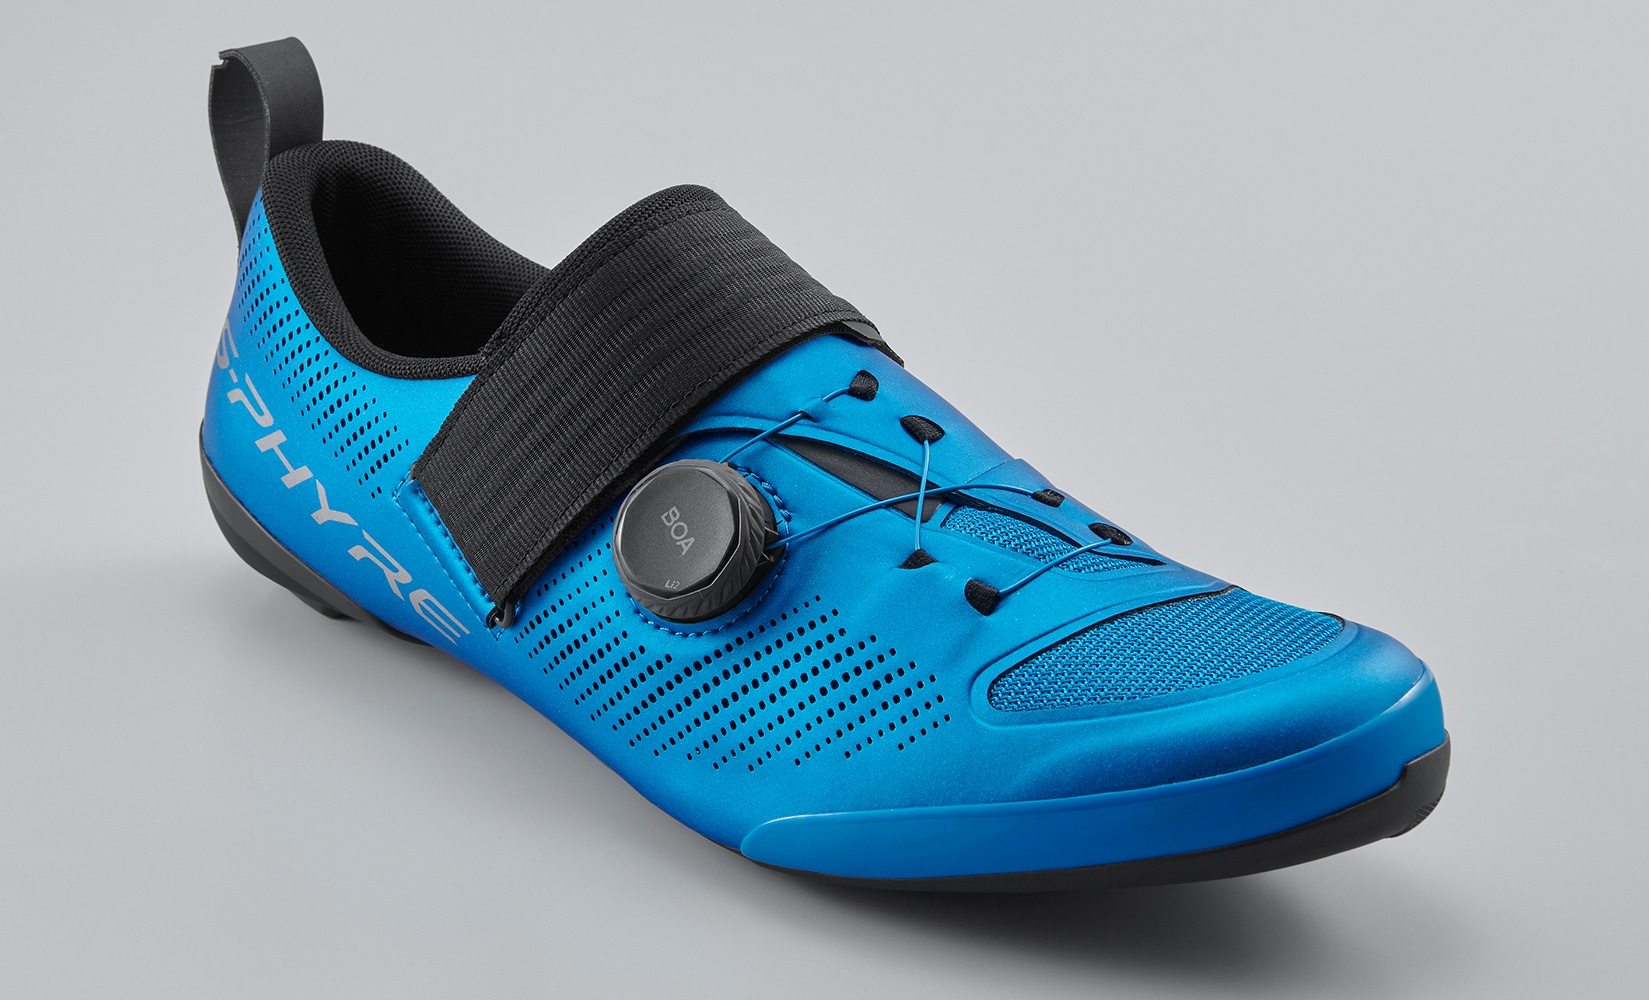 Shimano Introduces Three New S-Phyre Shoe Models